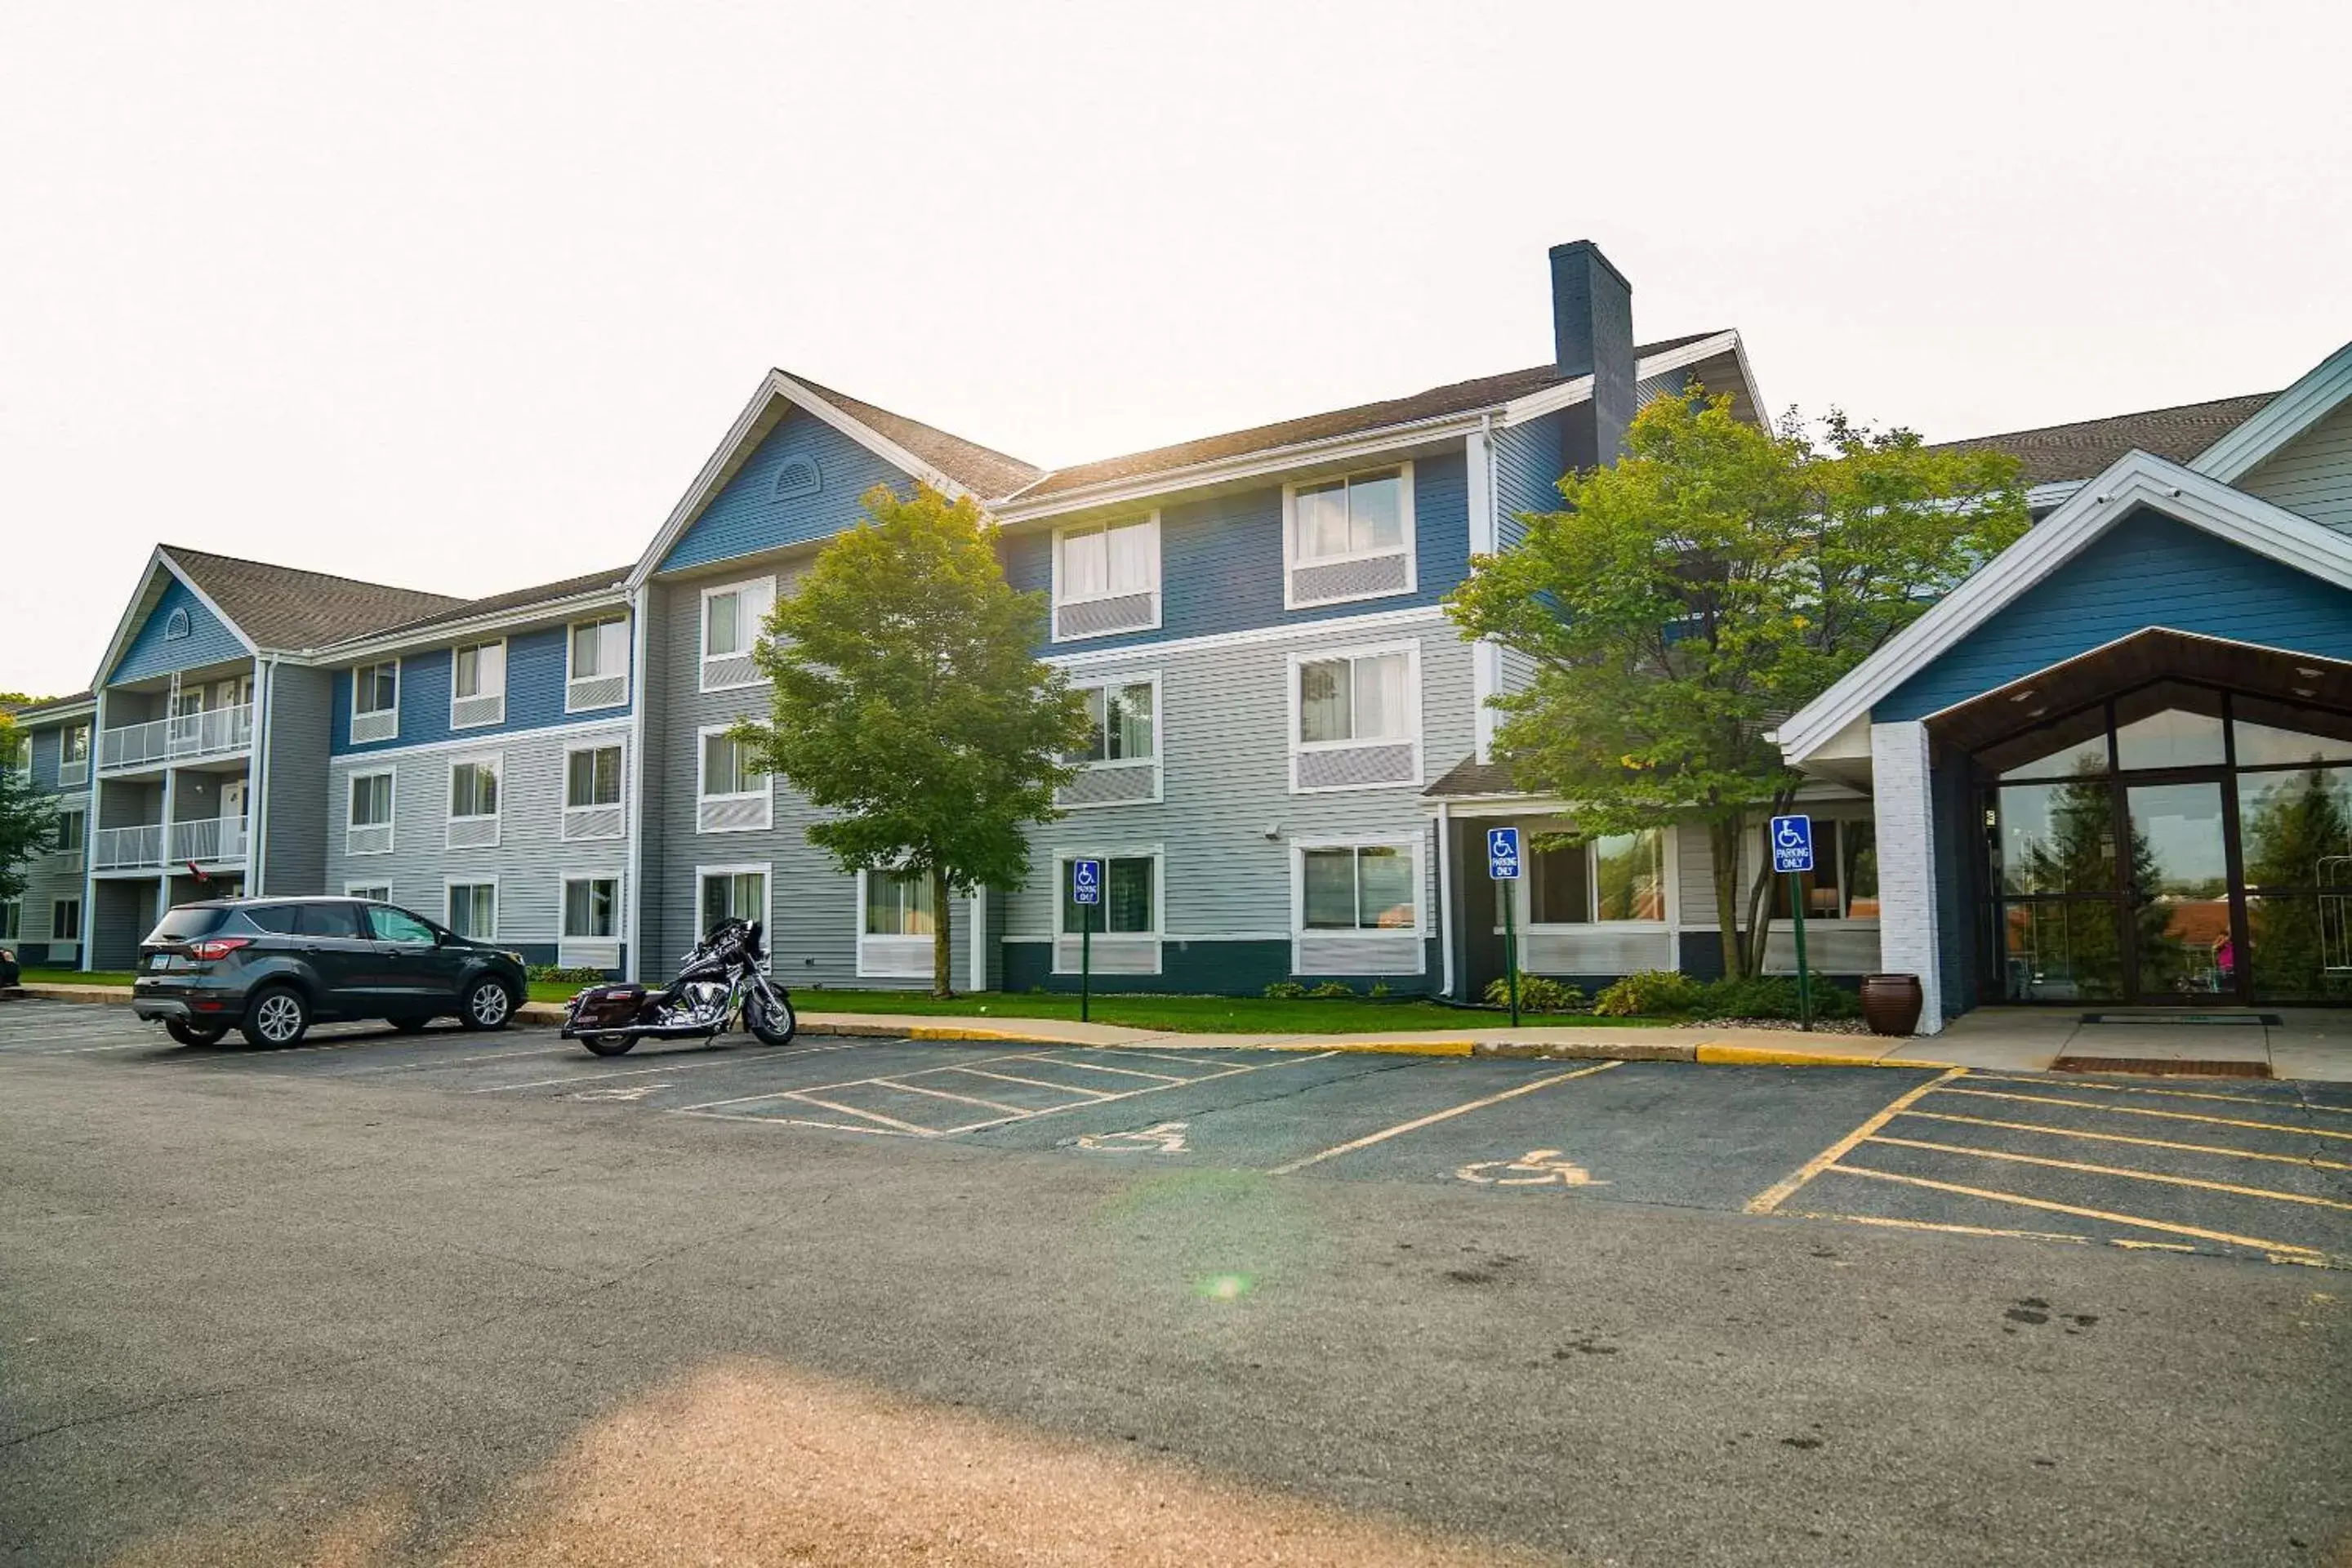 Property Building in Quality Inn near Medical Center